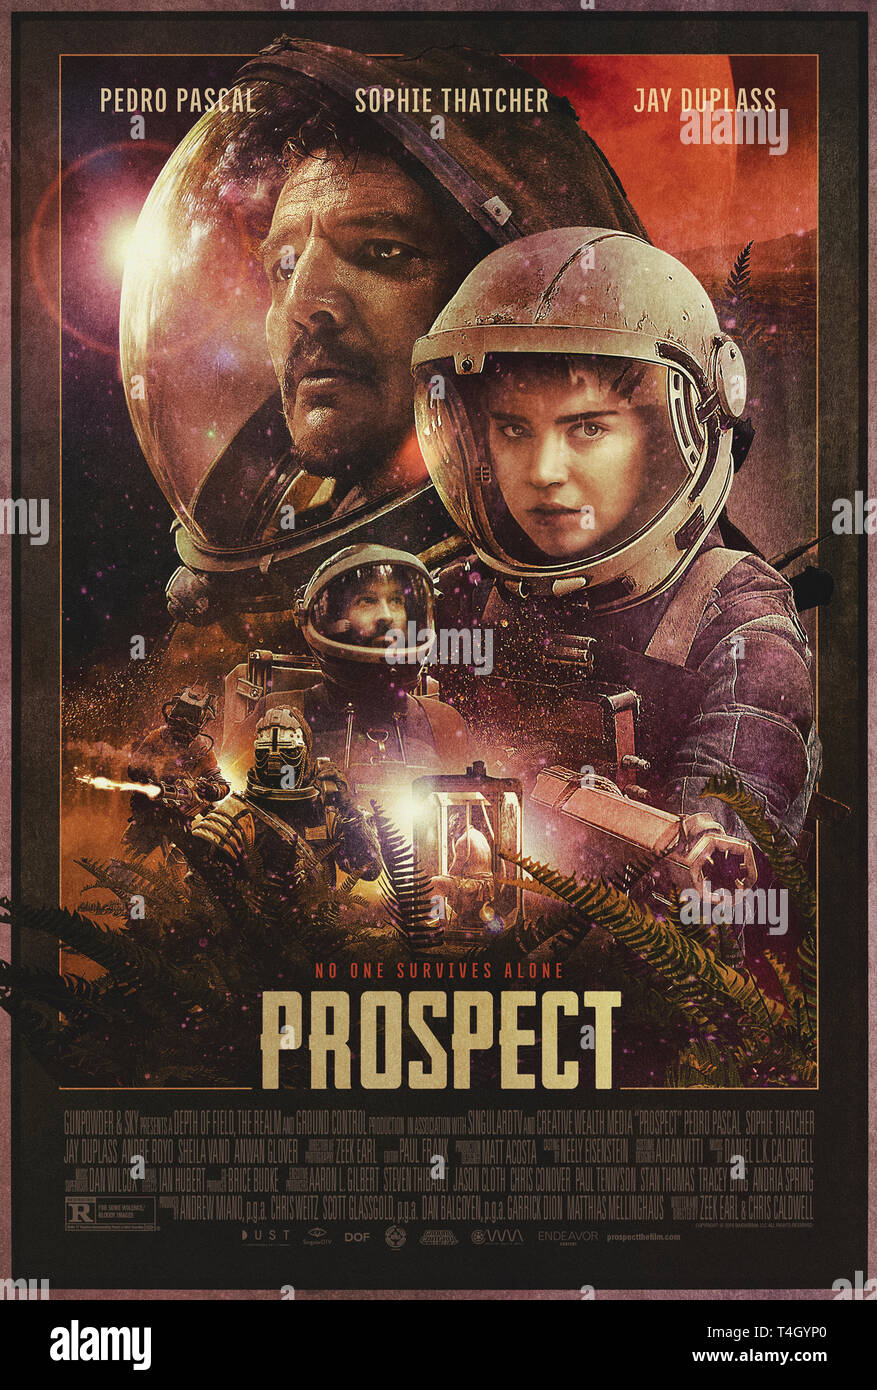 Prospect (2018) directed by Christopher Caldwell and Zeek Earl and starring Sophie Thatcher, Jay Duplass and Pedro Pascal. A father and daughter prospecting team land on a hostile alien moon. Stock Photo